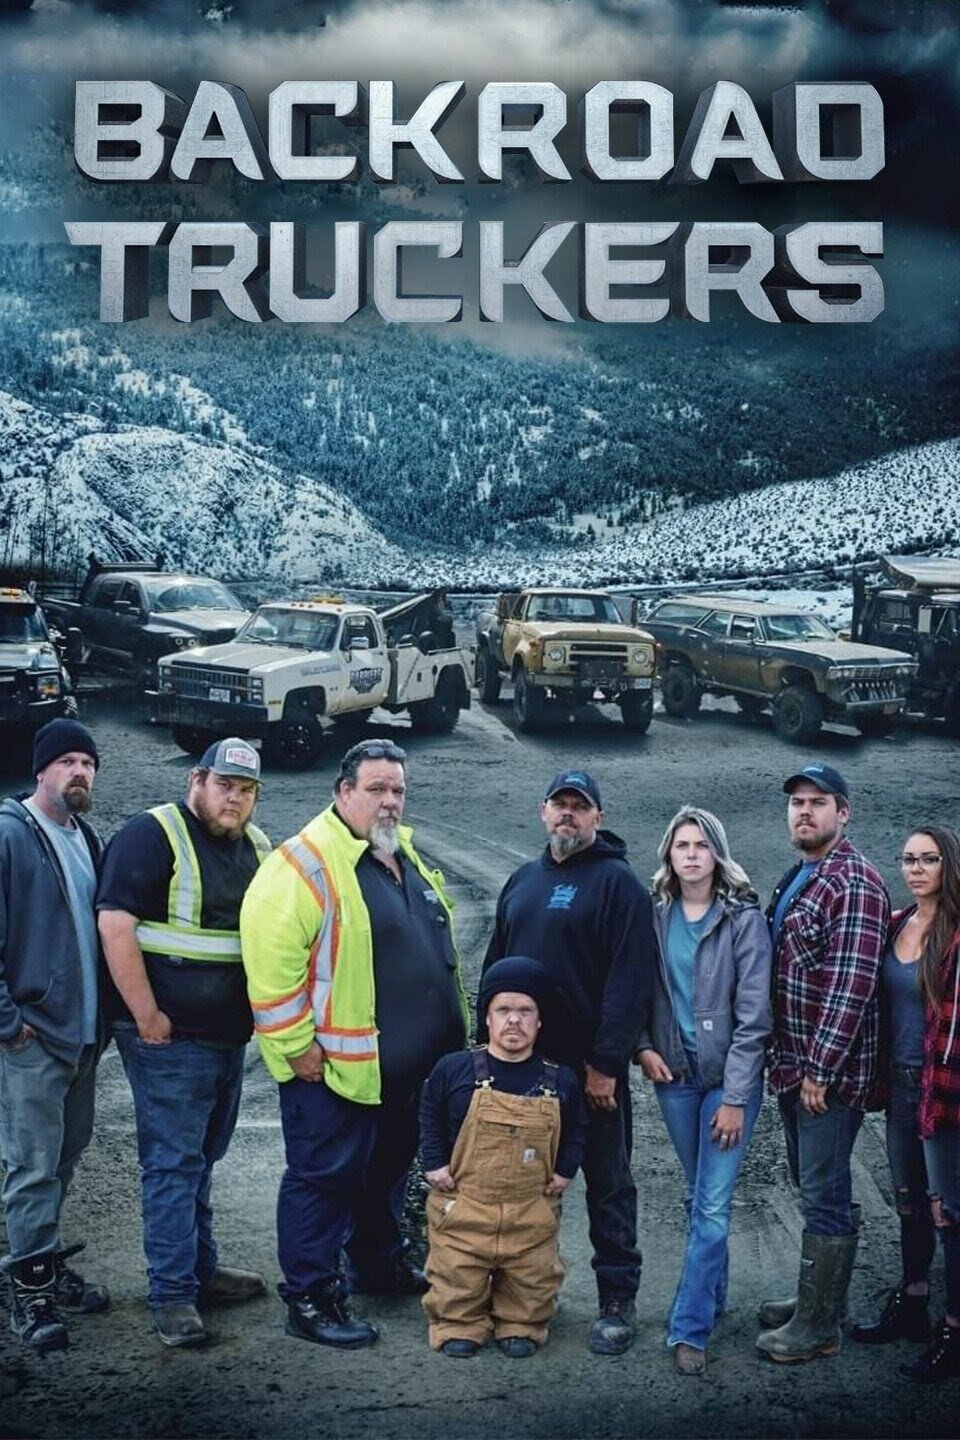 Backroad truckers cancelled